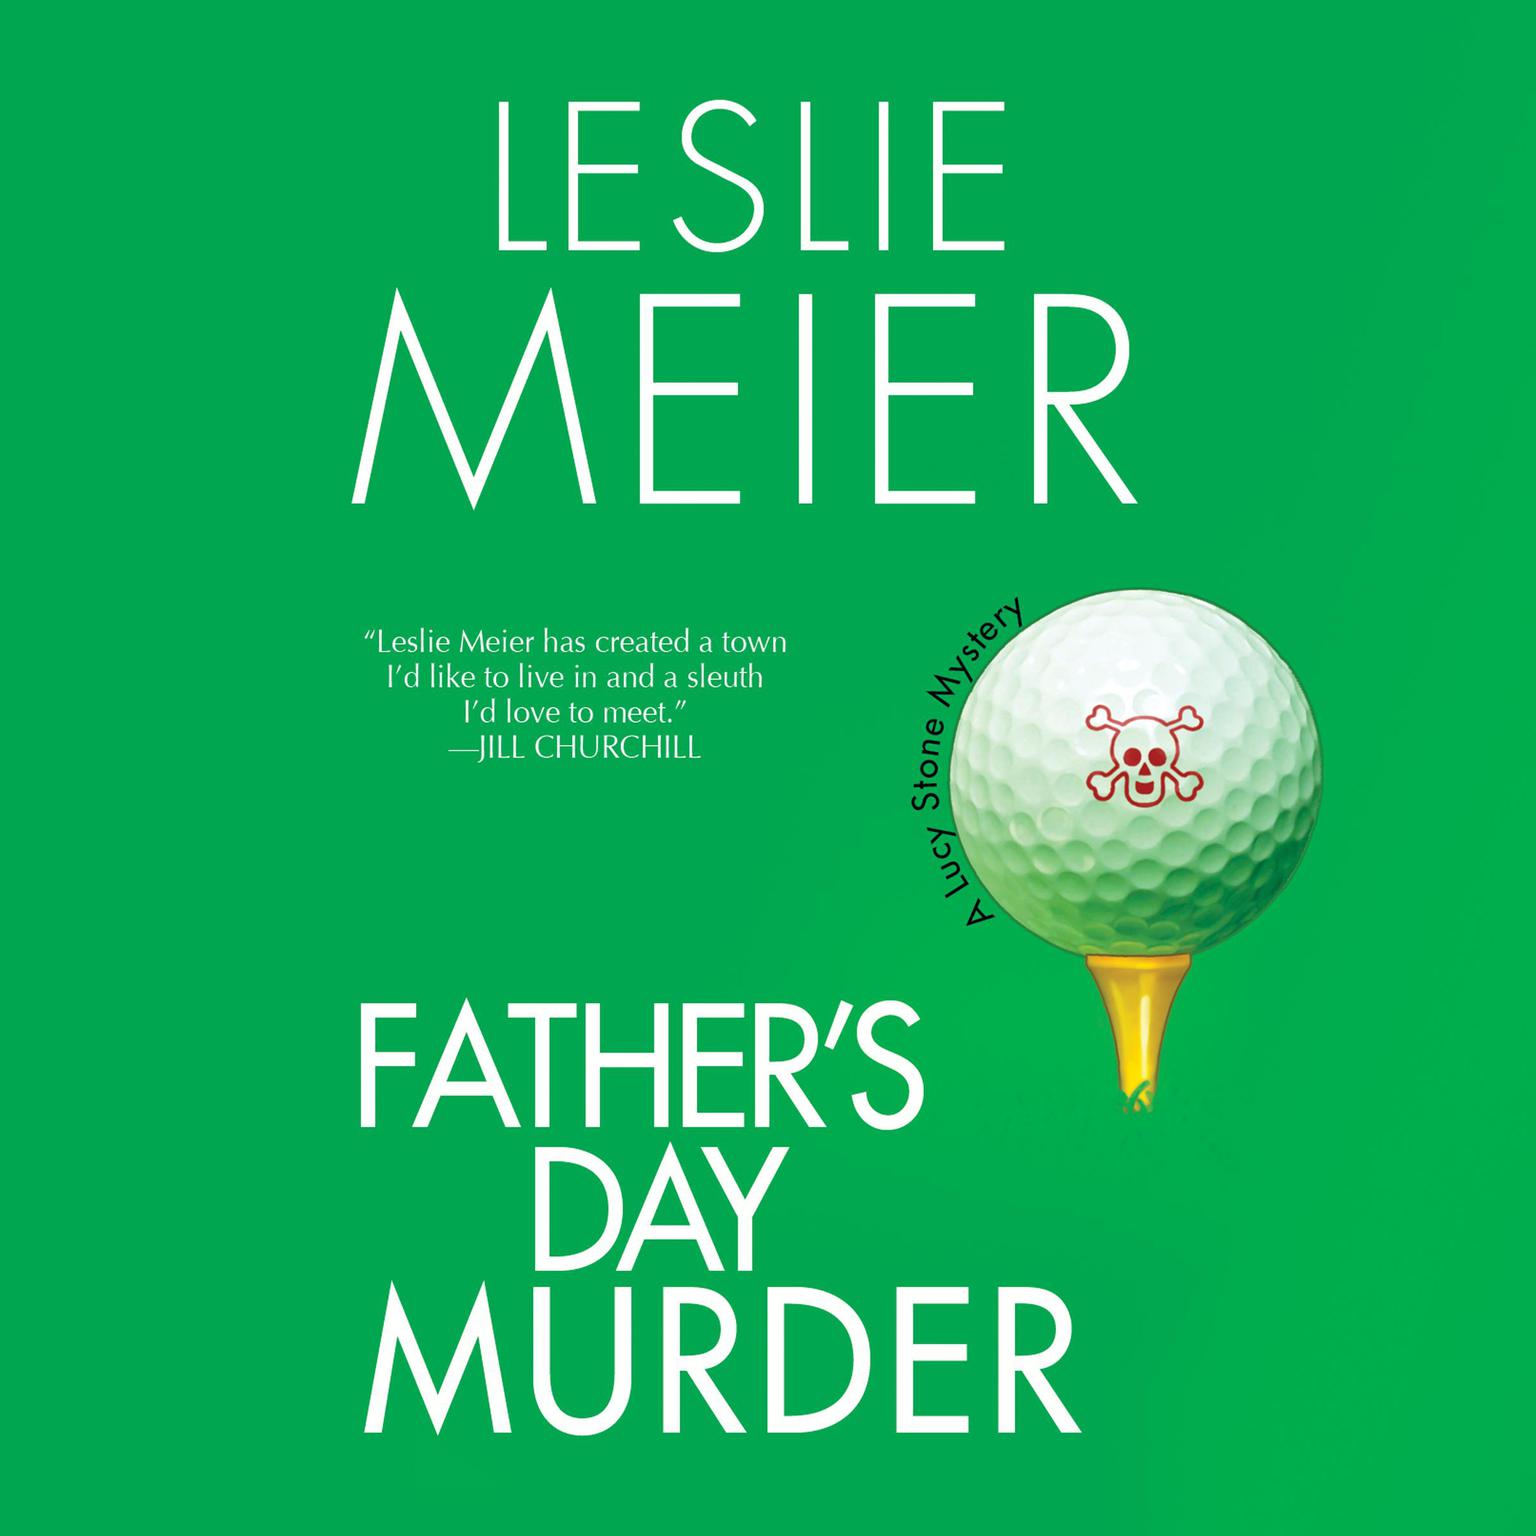 Fathers Day Murder: A Lucy Stone Mystery Audiobook, by Leslie Meier